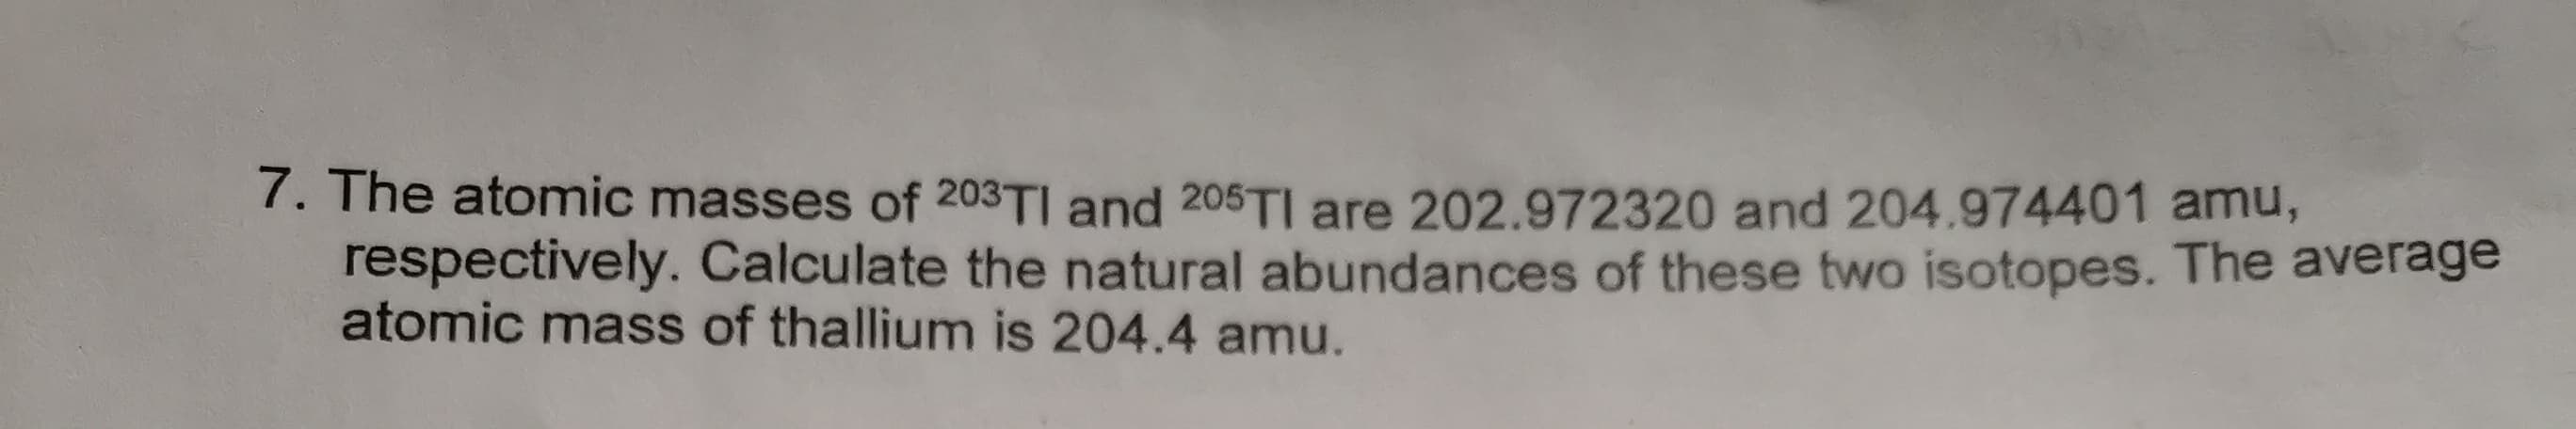 7. The atomic masses of 203TI and 205TI are 202.972320 and 204.974401 amu,
respectively. Calculate the natural abundances of these two isotopes. The average
atomic mass of thallium is 204.4 amu.
